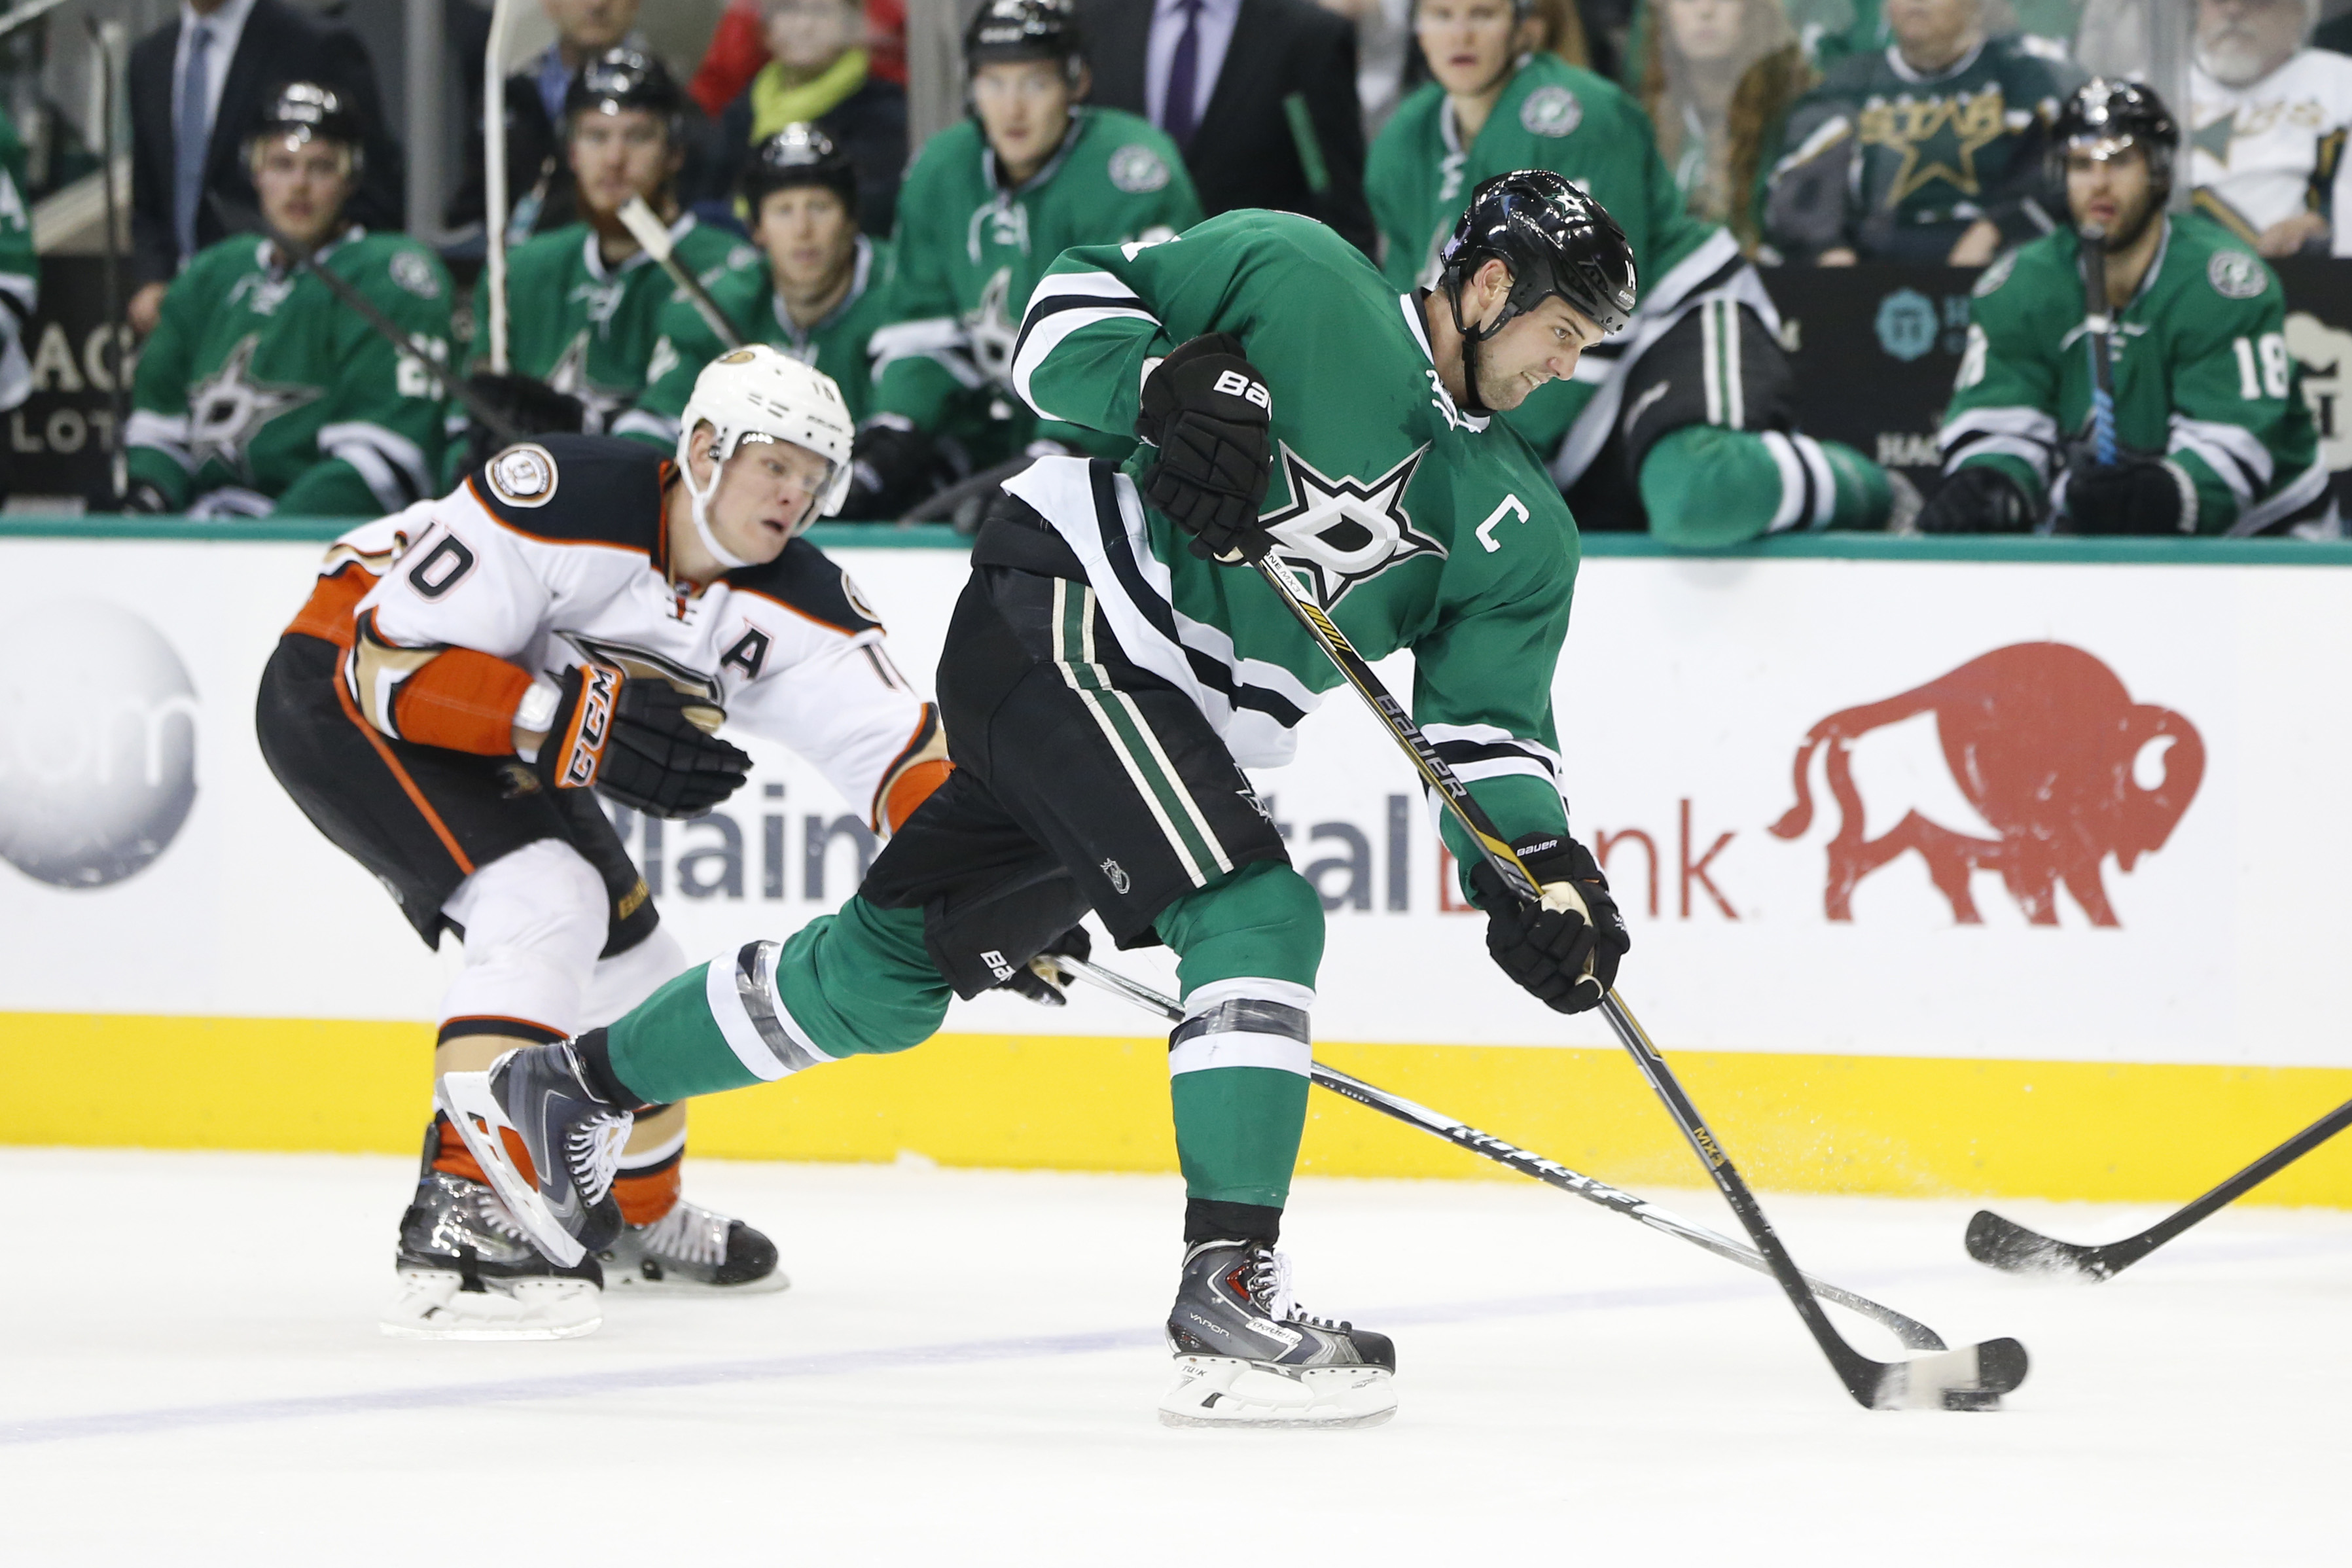 Jamie Benn takes a shot with Corey Perry backchecking last season at American Airlines Arena.